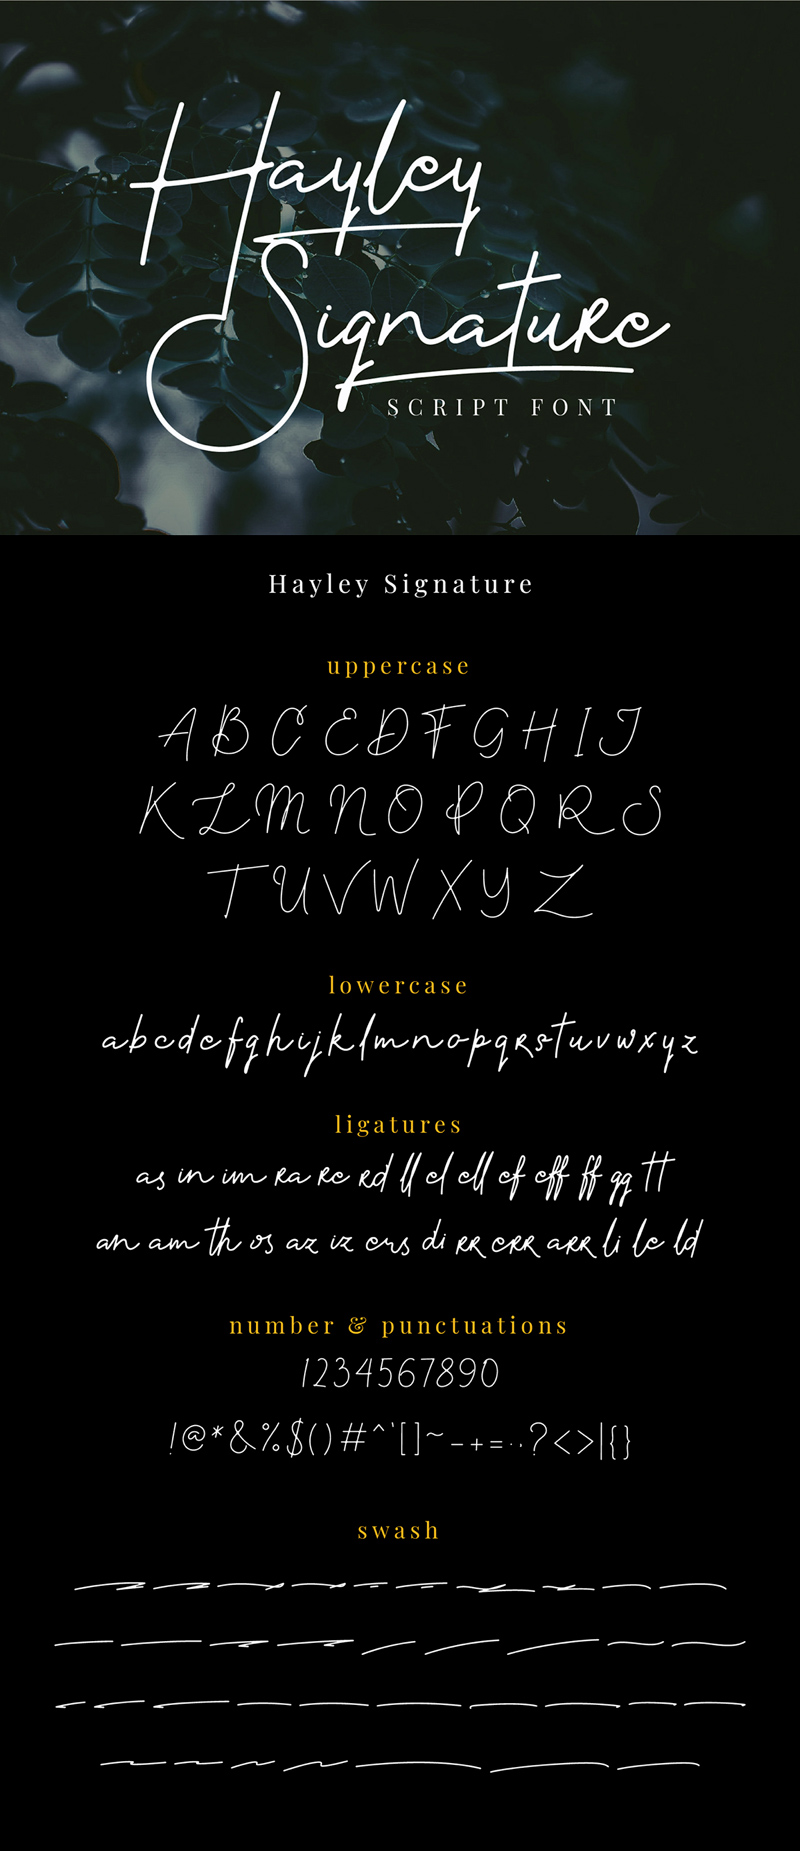 Fuente Signature de Hayley - Tyepe Fiting Free